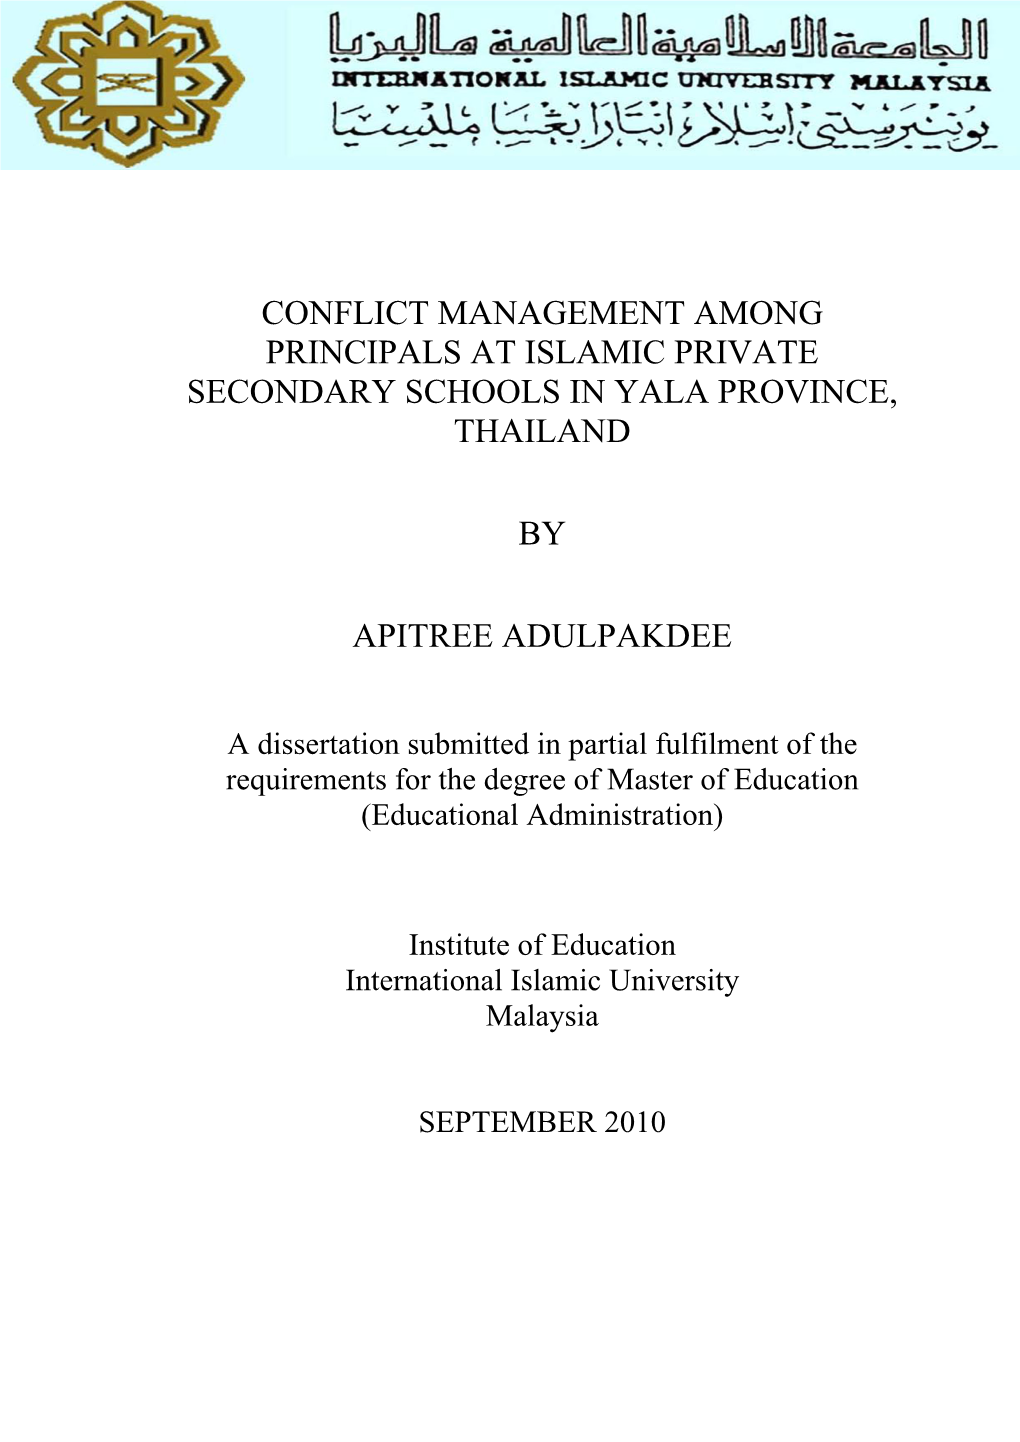 Conflict Management Among Principals at Islamic Private Secondary Schools in Yala Province, Thailand